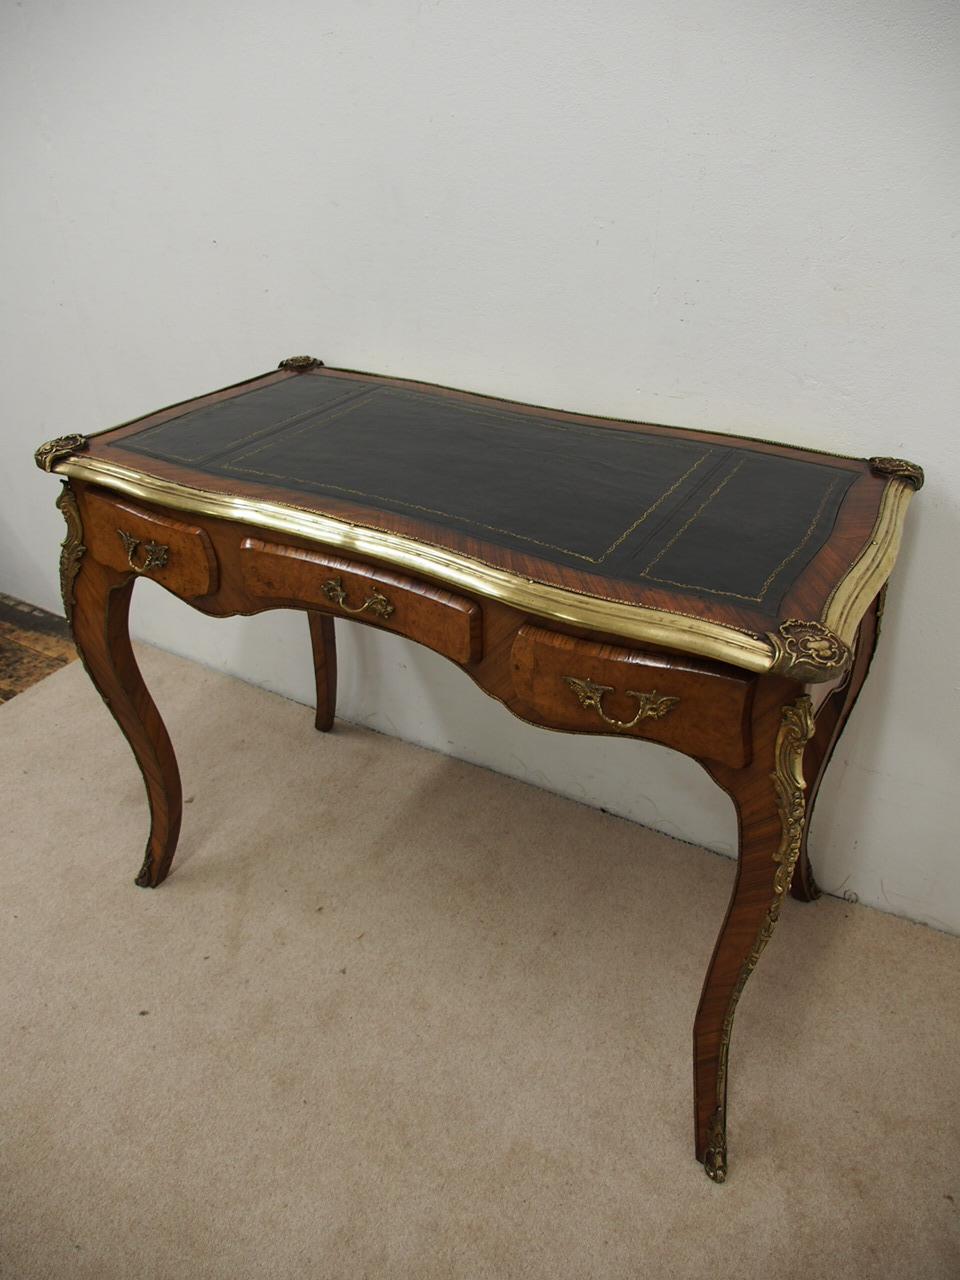 Neat sized French figured walnut serpentine-front, writing table, circa 1900. With extensive brass mountings including brass mouldings around the top and figured walnut banding, a gilt tool and dark coloured skiver that is in excellent condition.